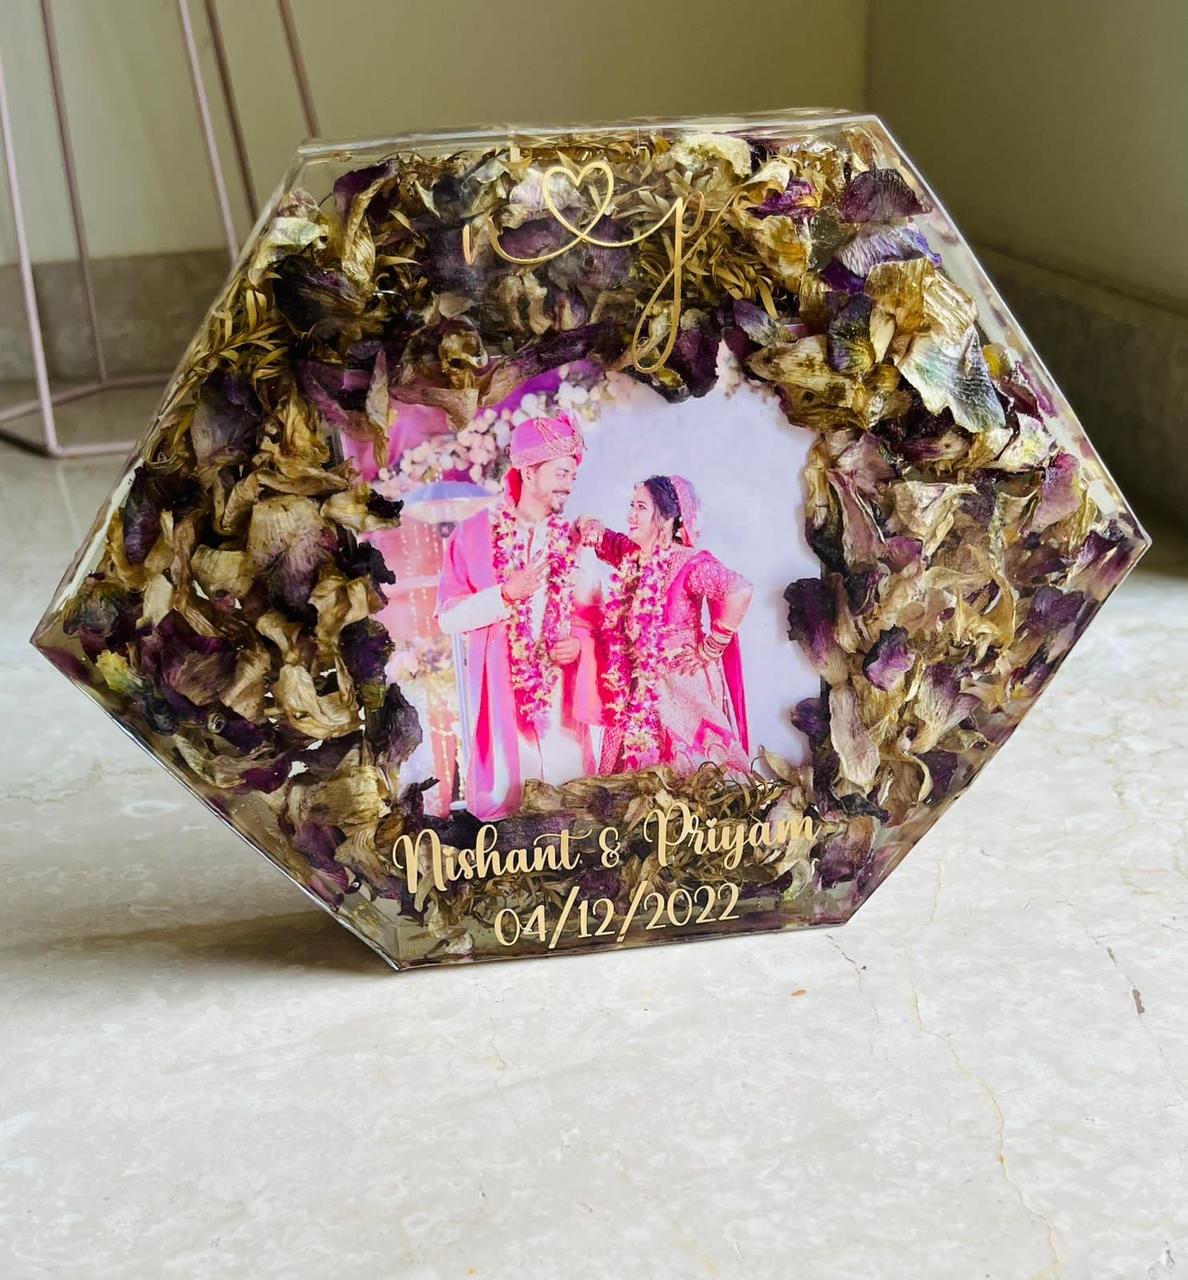 Resin Hexagonal Block with Couple's Picture and Preserved Wedding Flowers